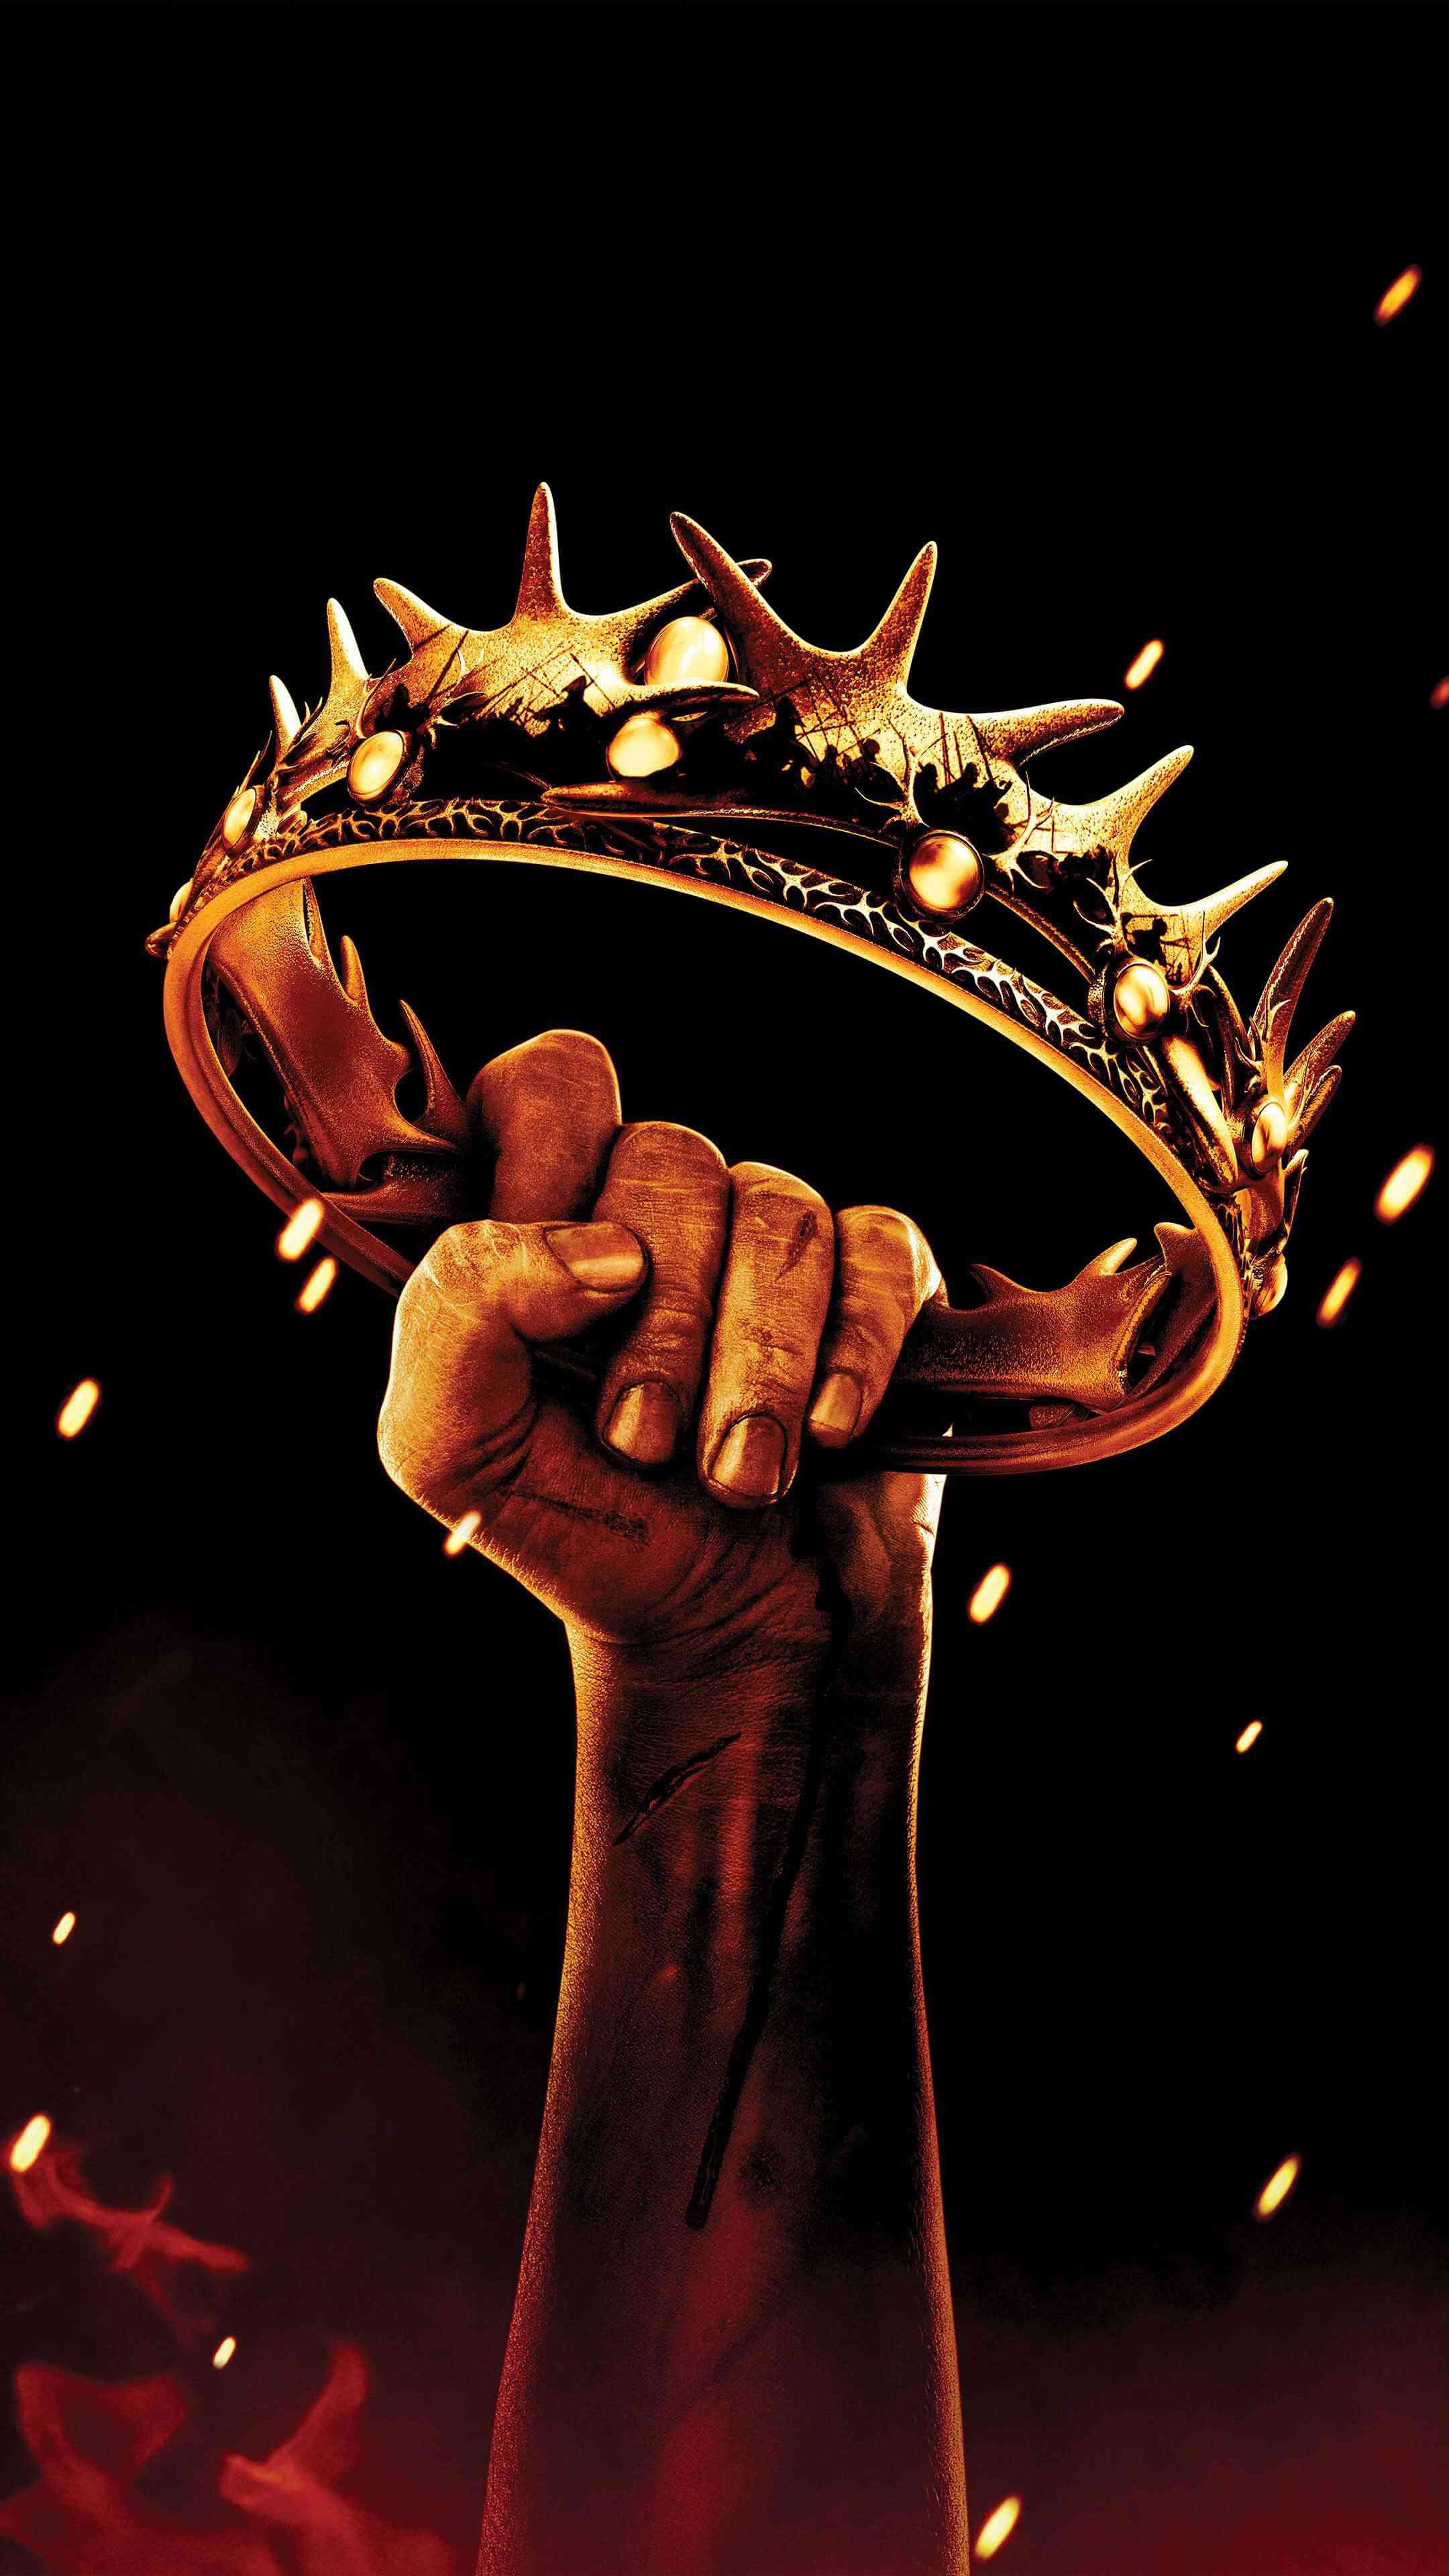 Game of thrones crown, Symbol of power, Coveted royalty, Fantasy allure, 2160x3840 4K Handy